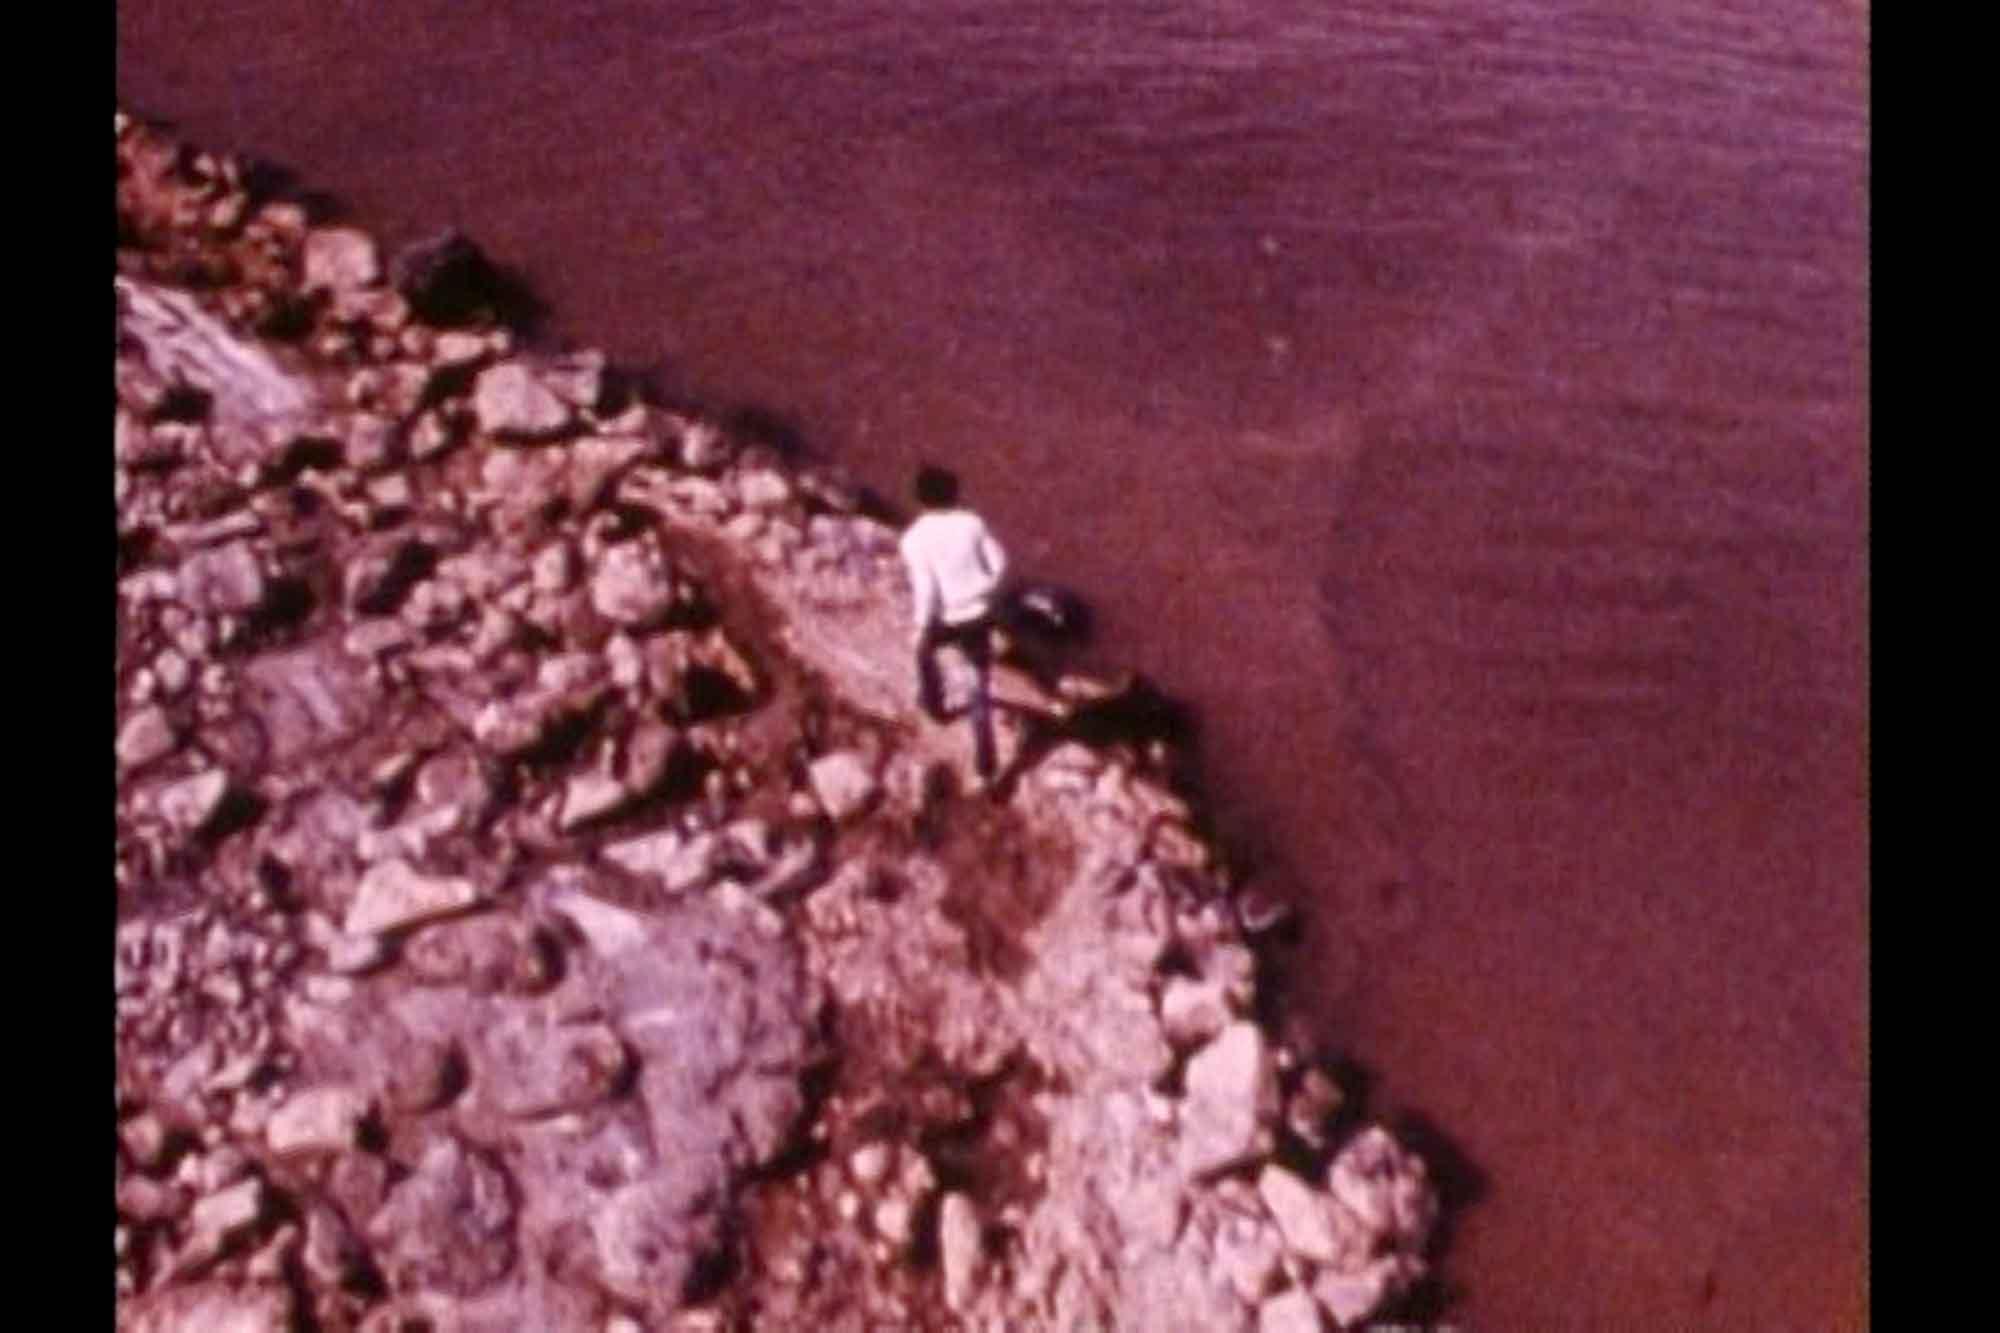 A still from the film Spiral Jetty shot from a helicopter showing Smithson running on the jetty.